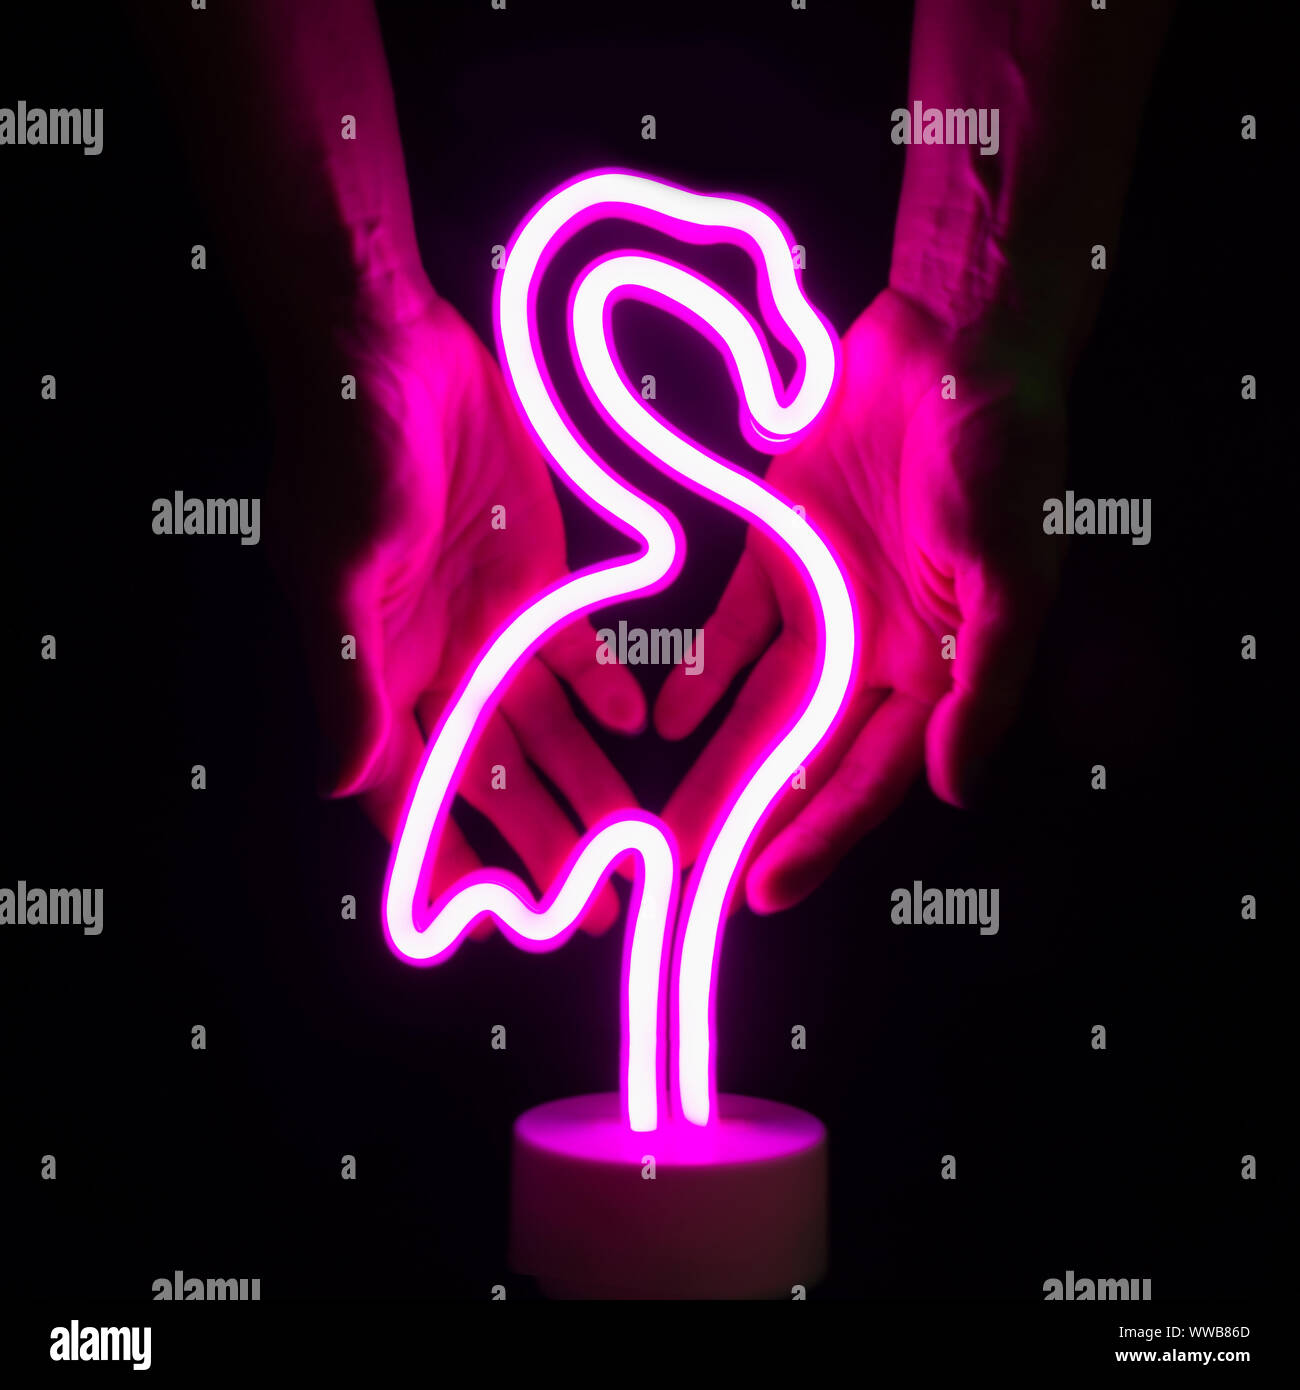 Neon pink flamingo LED lamp in female hands on a black background. Stock Photo